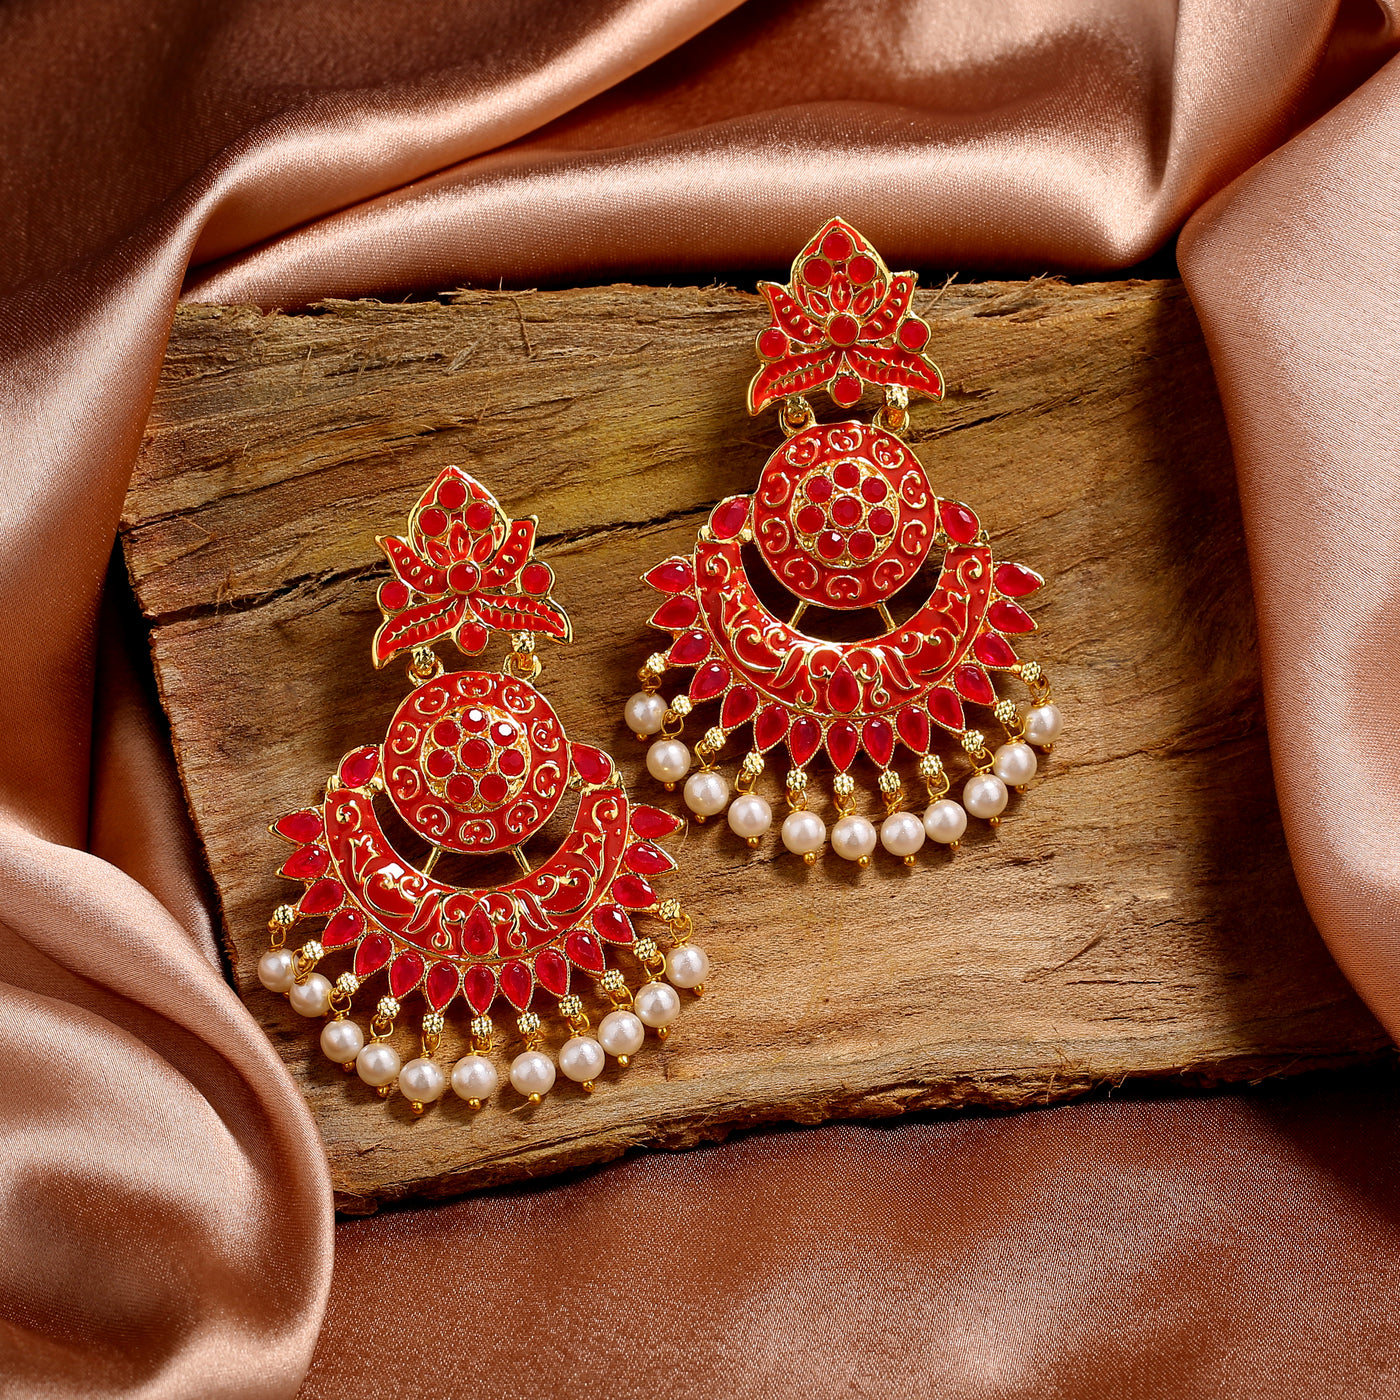 Estele Gold Plated Beautiful Traditional Red Meenakari Drop Earrings with Pearl for Women